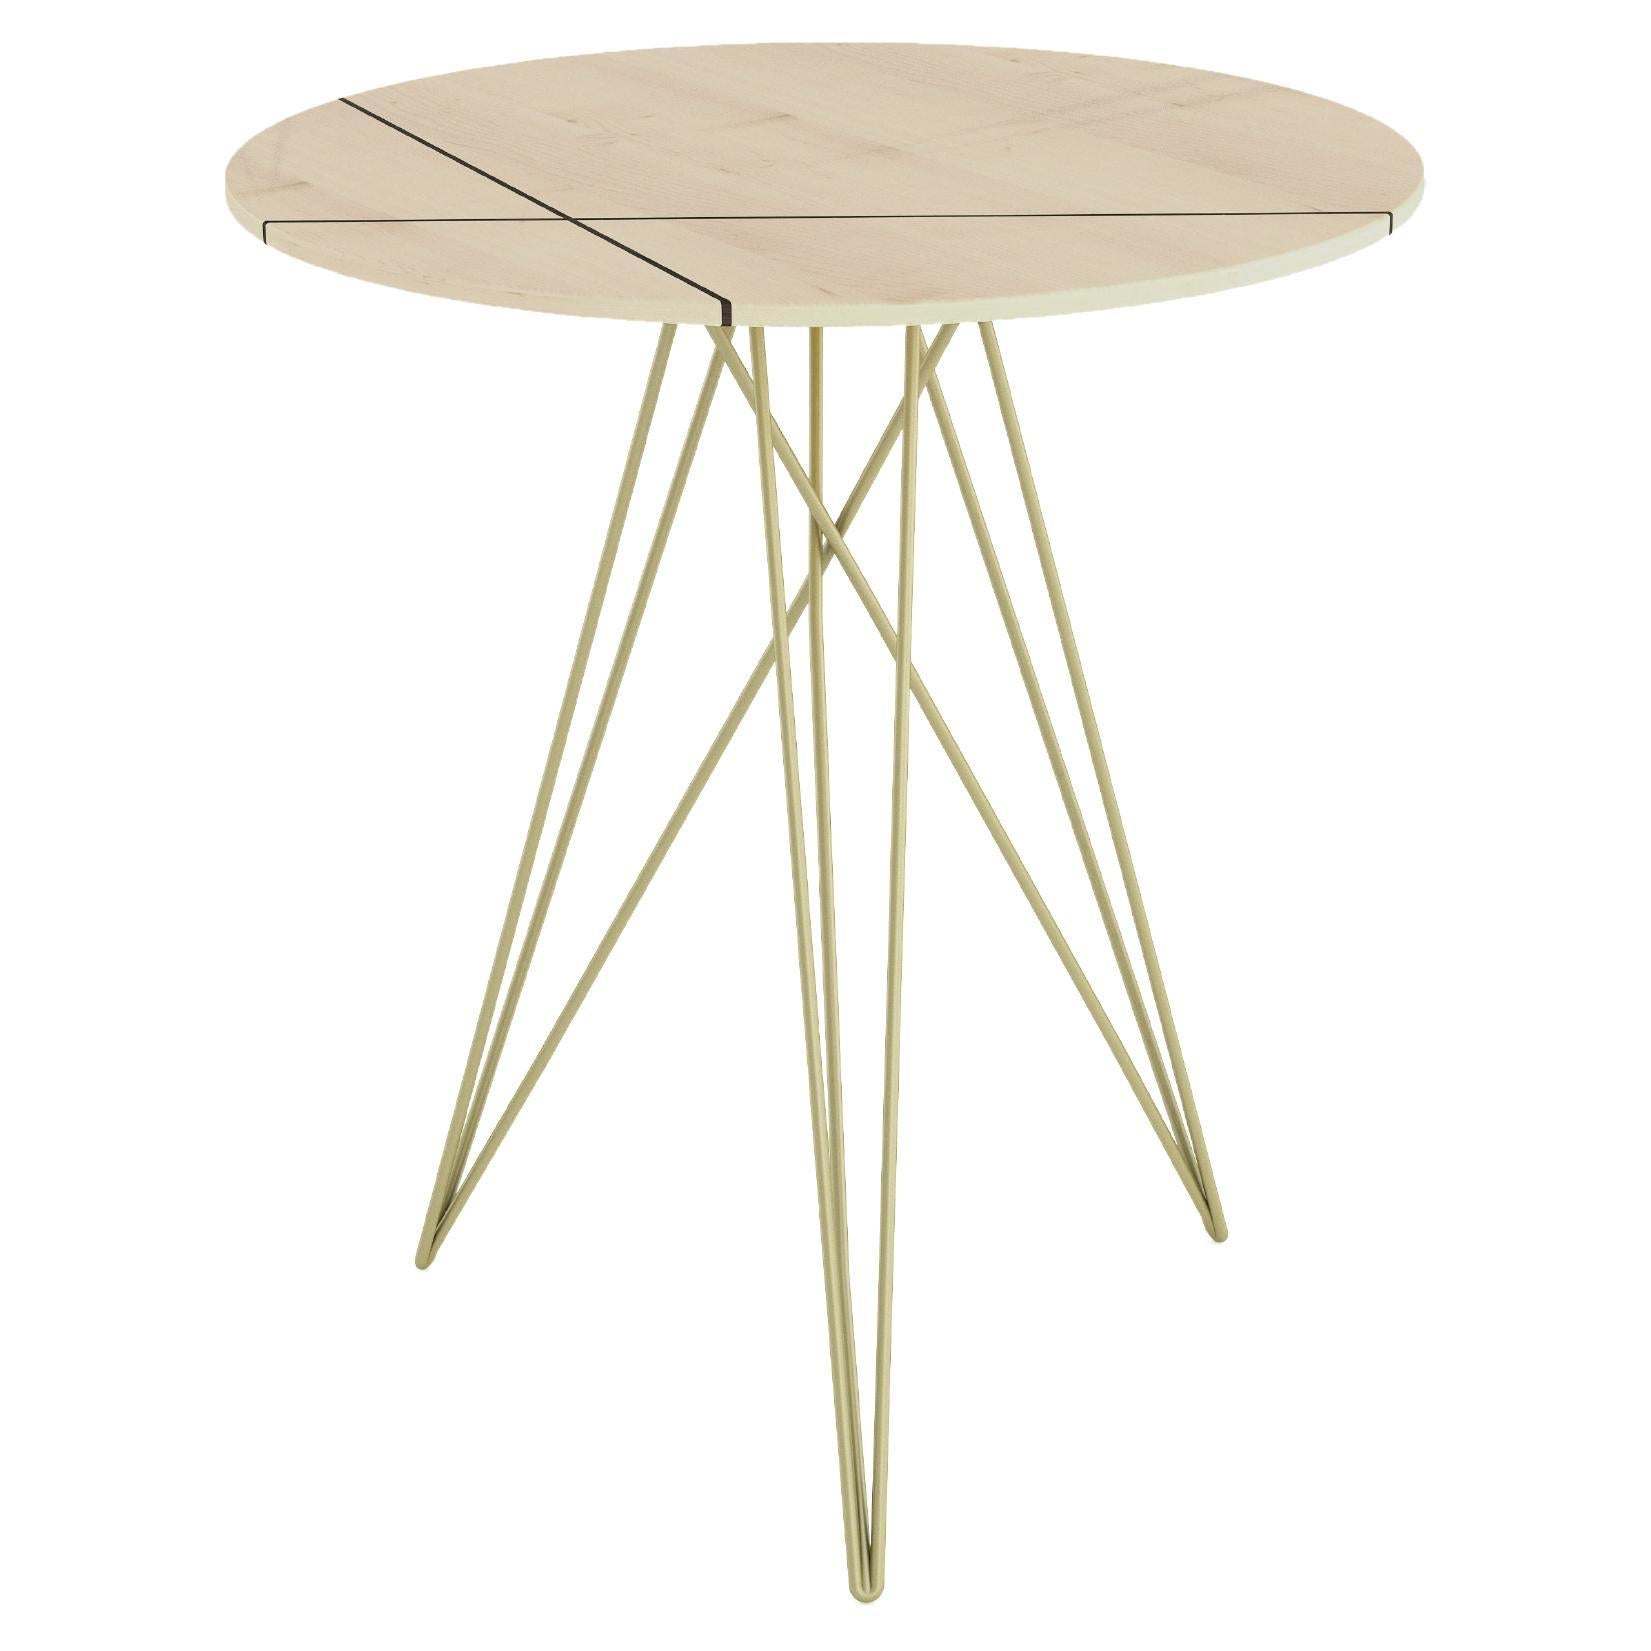 Hudson Hairpin Side Table with Wood Inlay Maple Brassy Gold For Sale